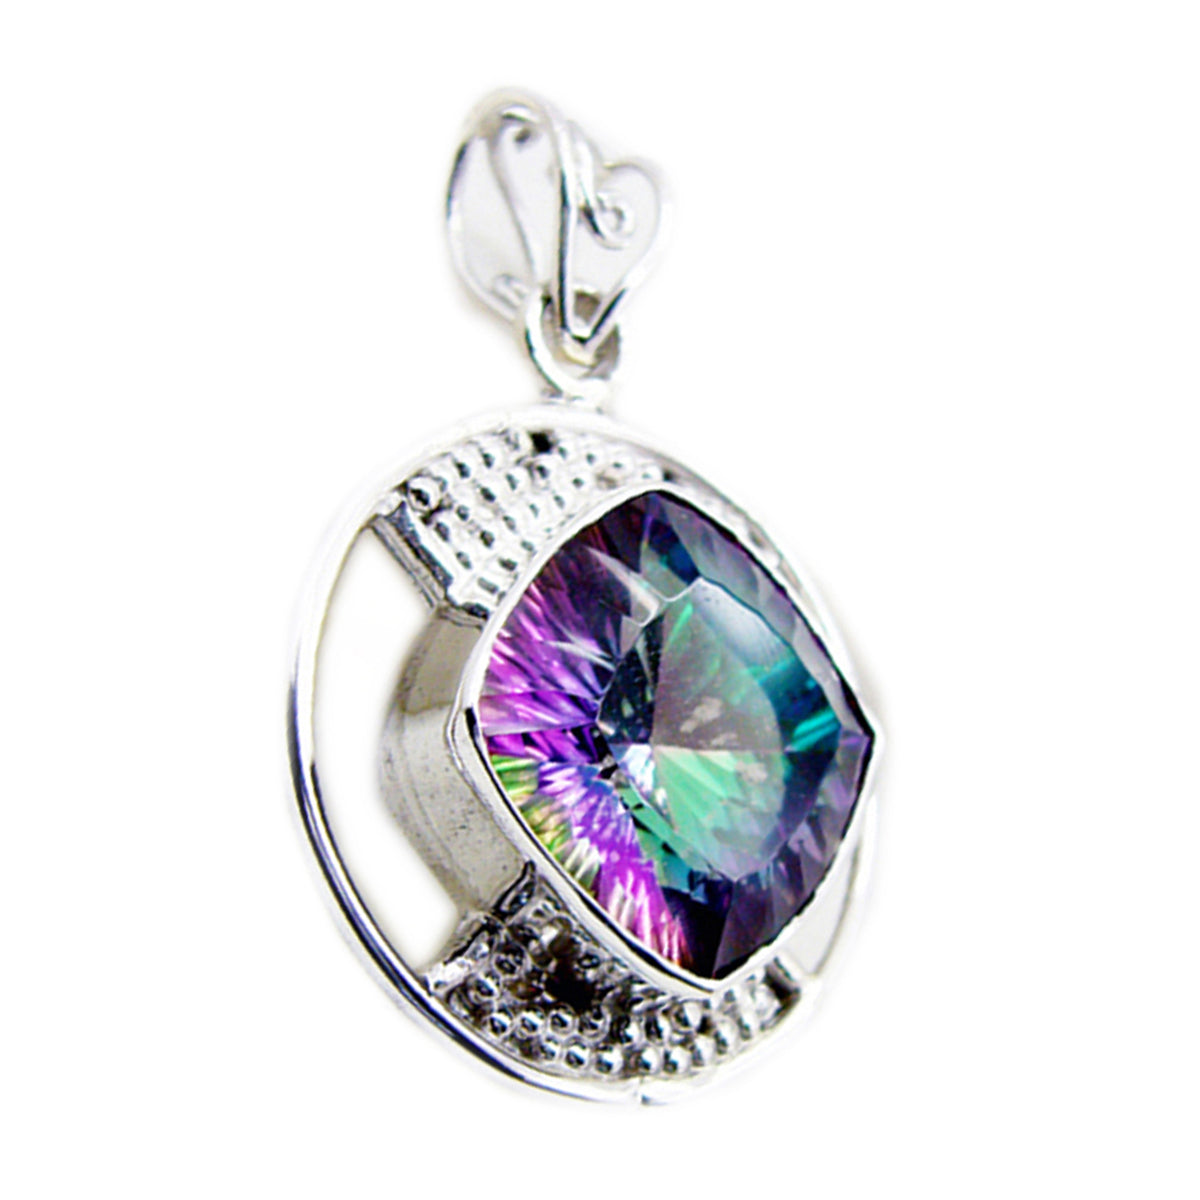 Riyo Pleasing Gems Cushion Faceted Multi Color Mystic Quartz Solid Silver Pendant Gift For Easter Sunday